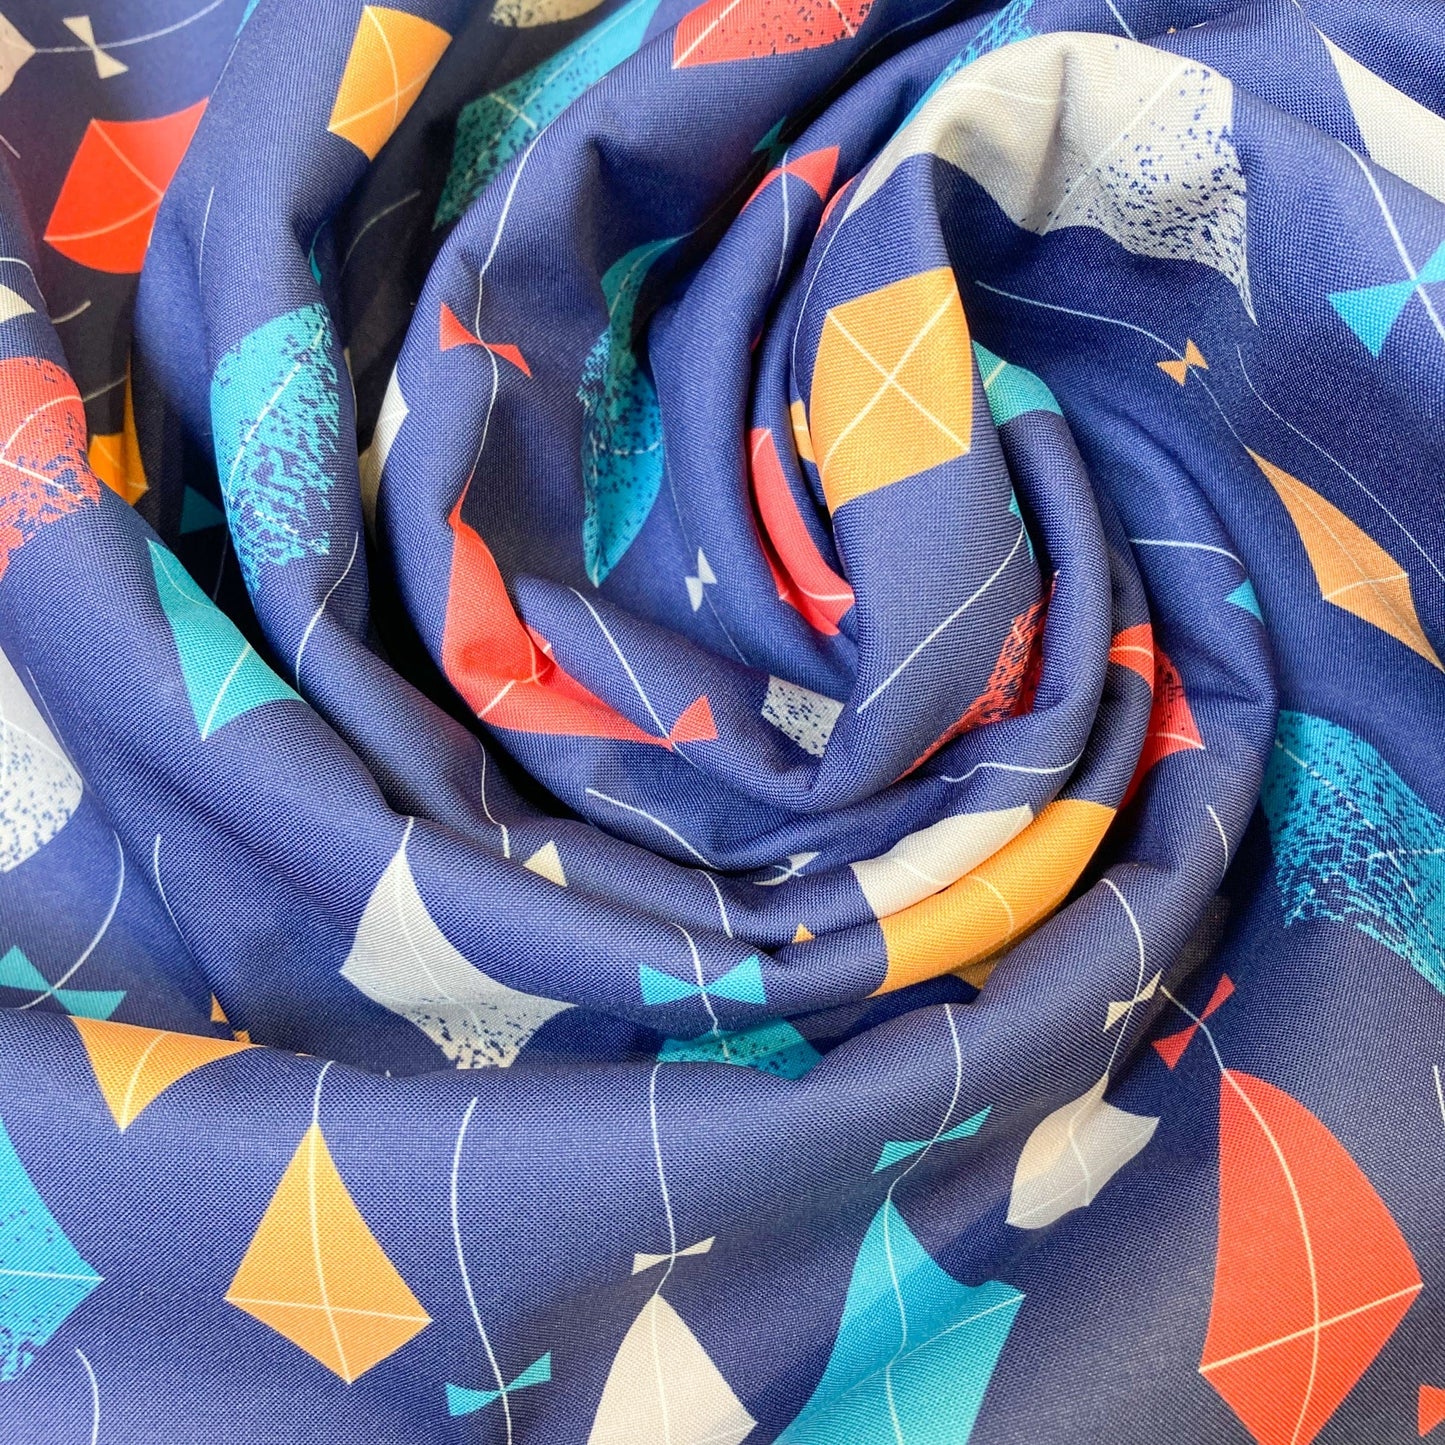 Softshell Fabric with Kite Print on Blue